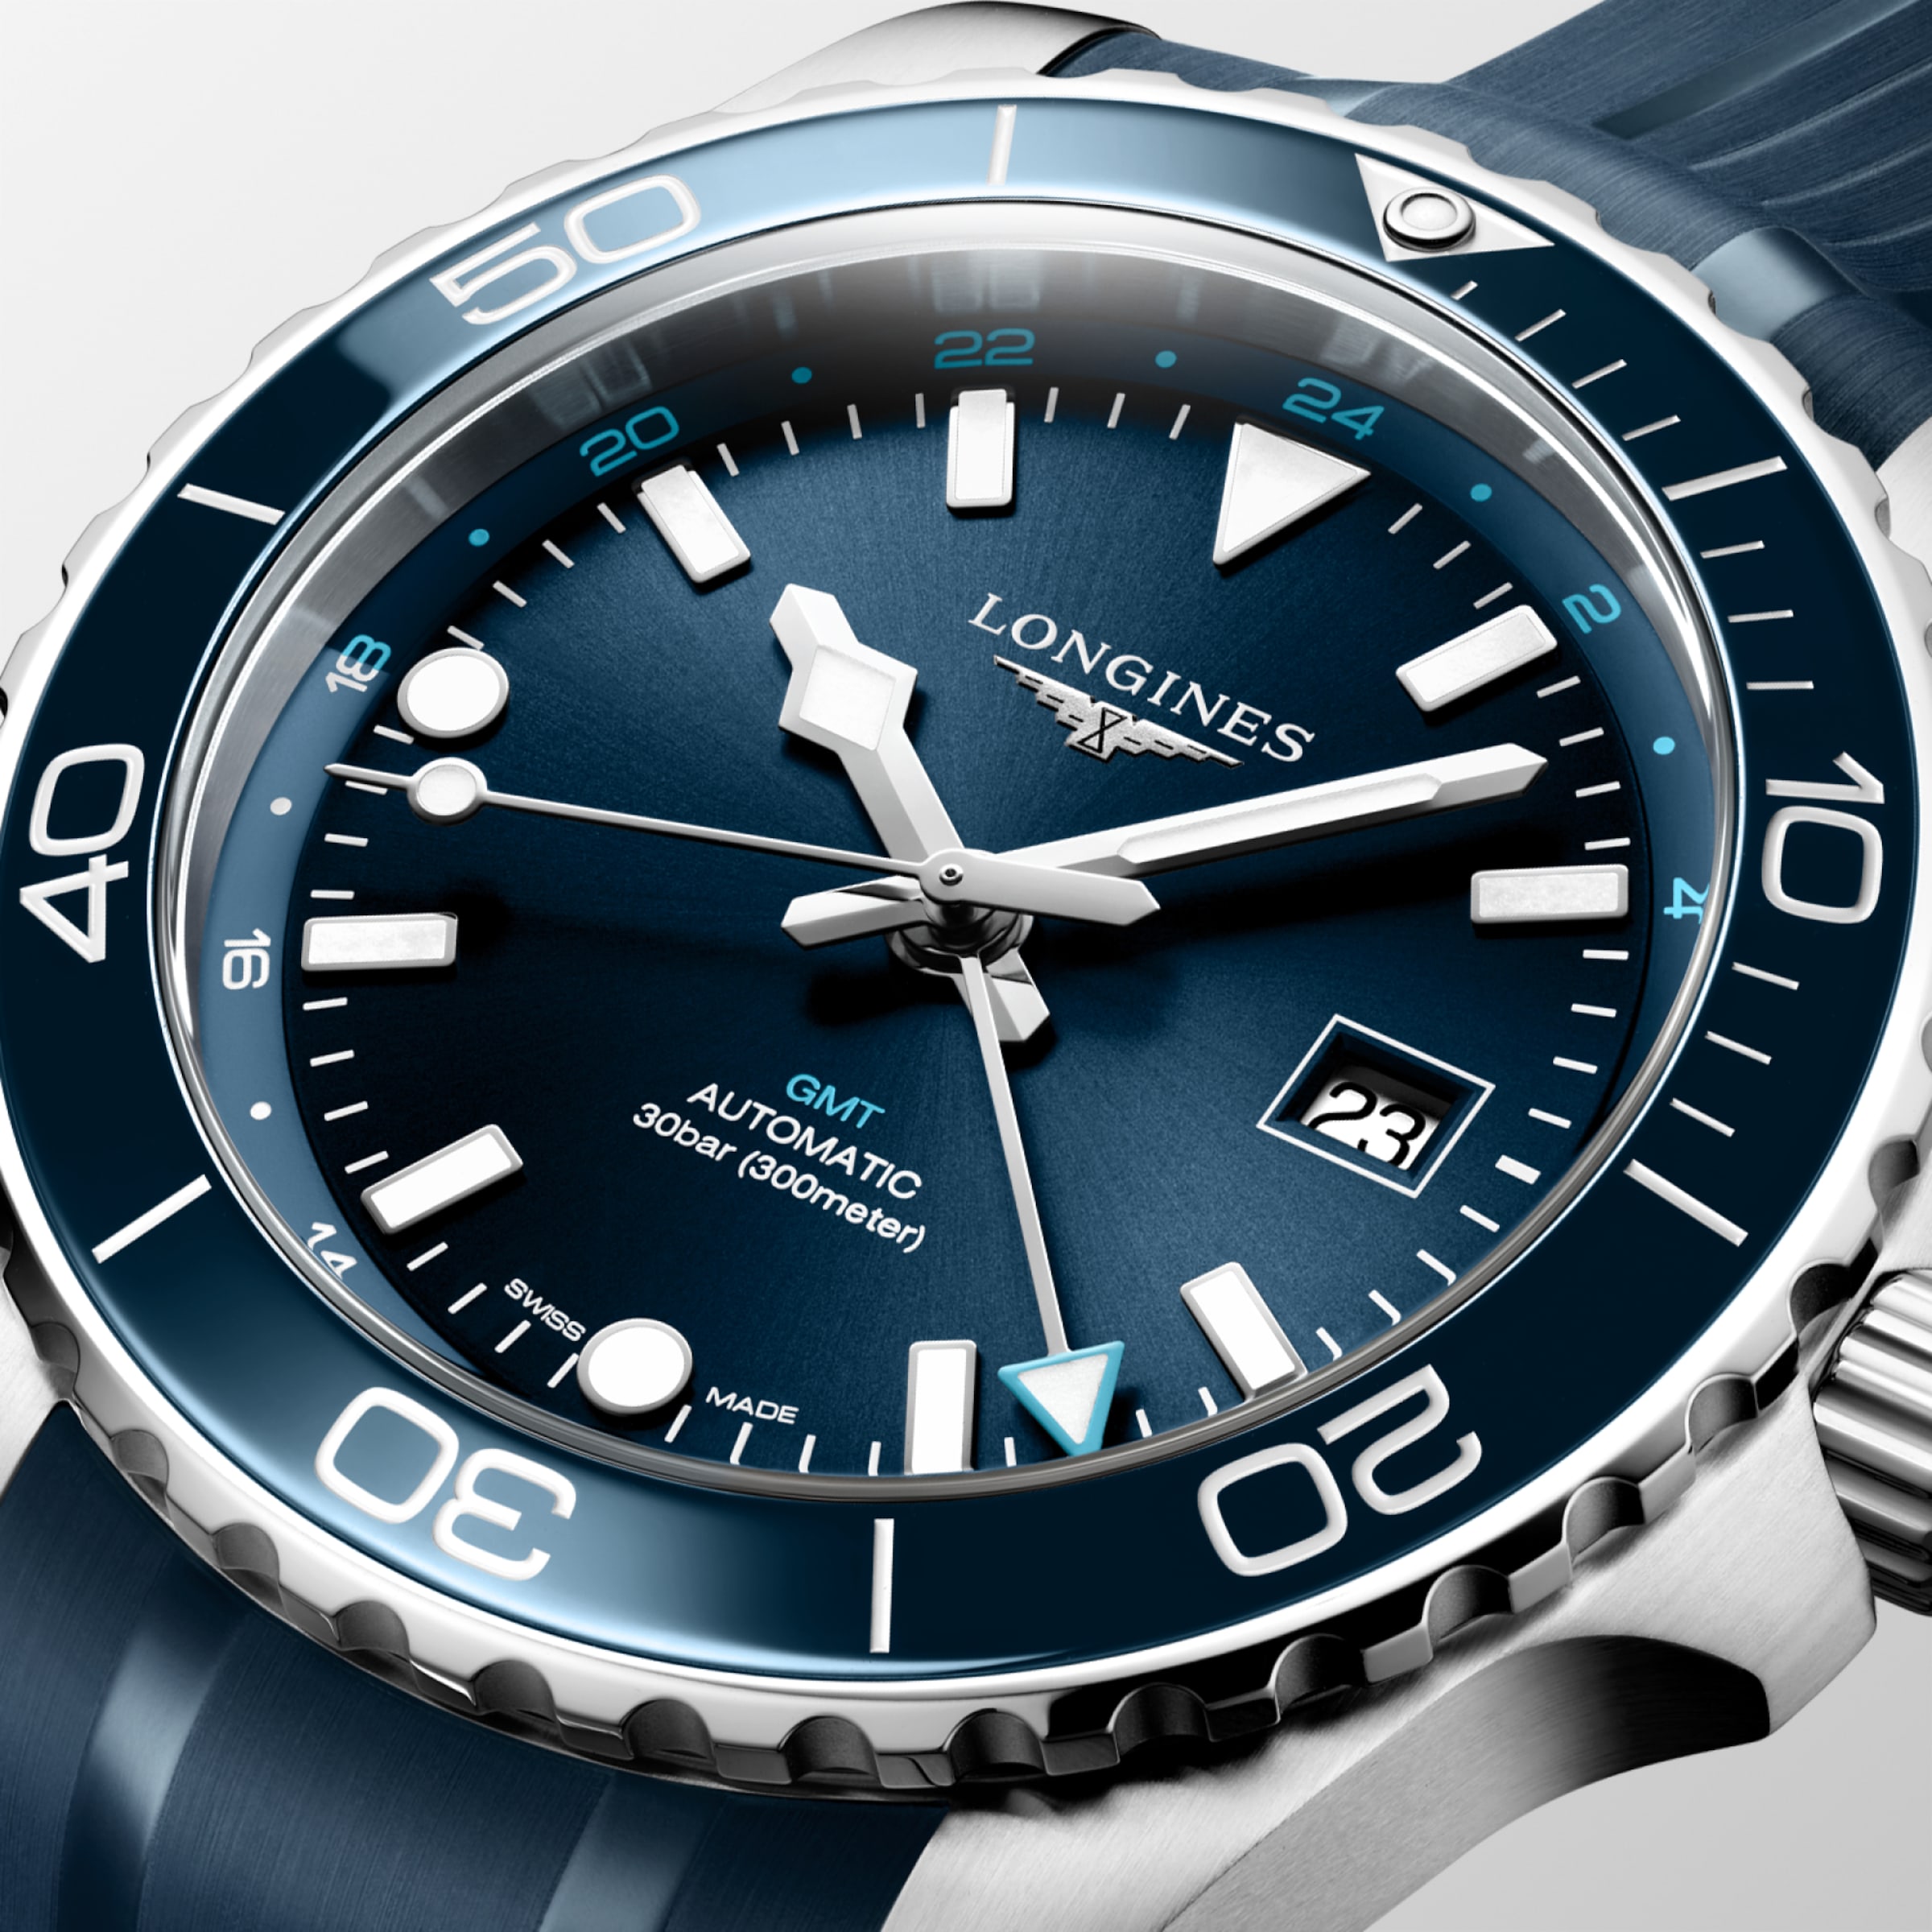 Longines HYDROCONQUEST Automatic Stainless steel and ceramic bezel Watch - L3.890.4.96.9